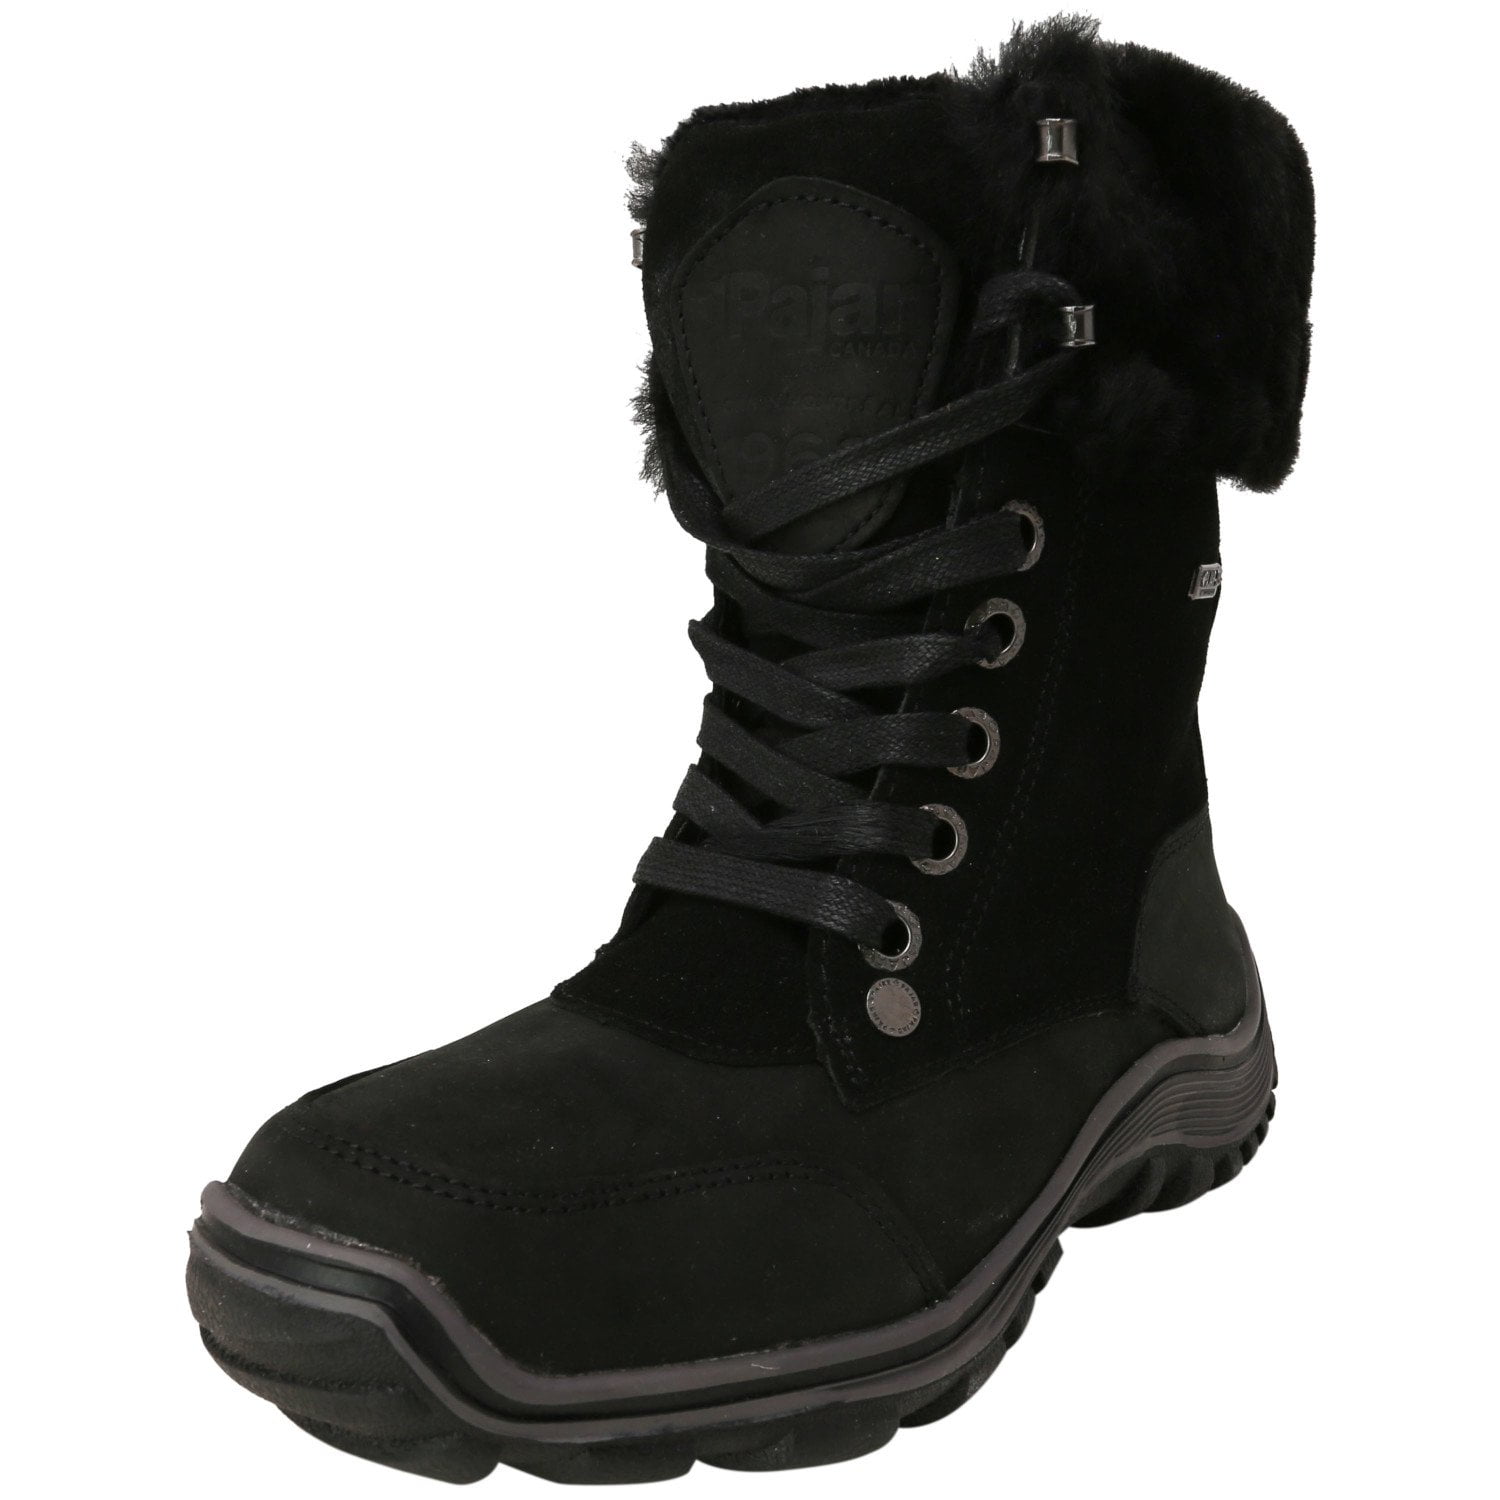 pajar boots with retractable cleats